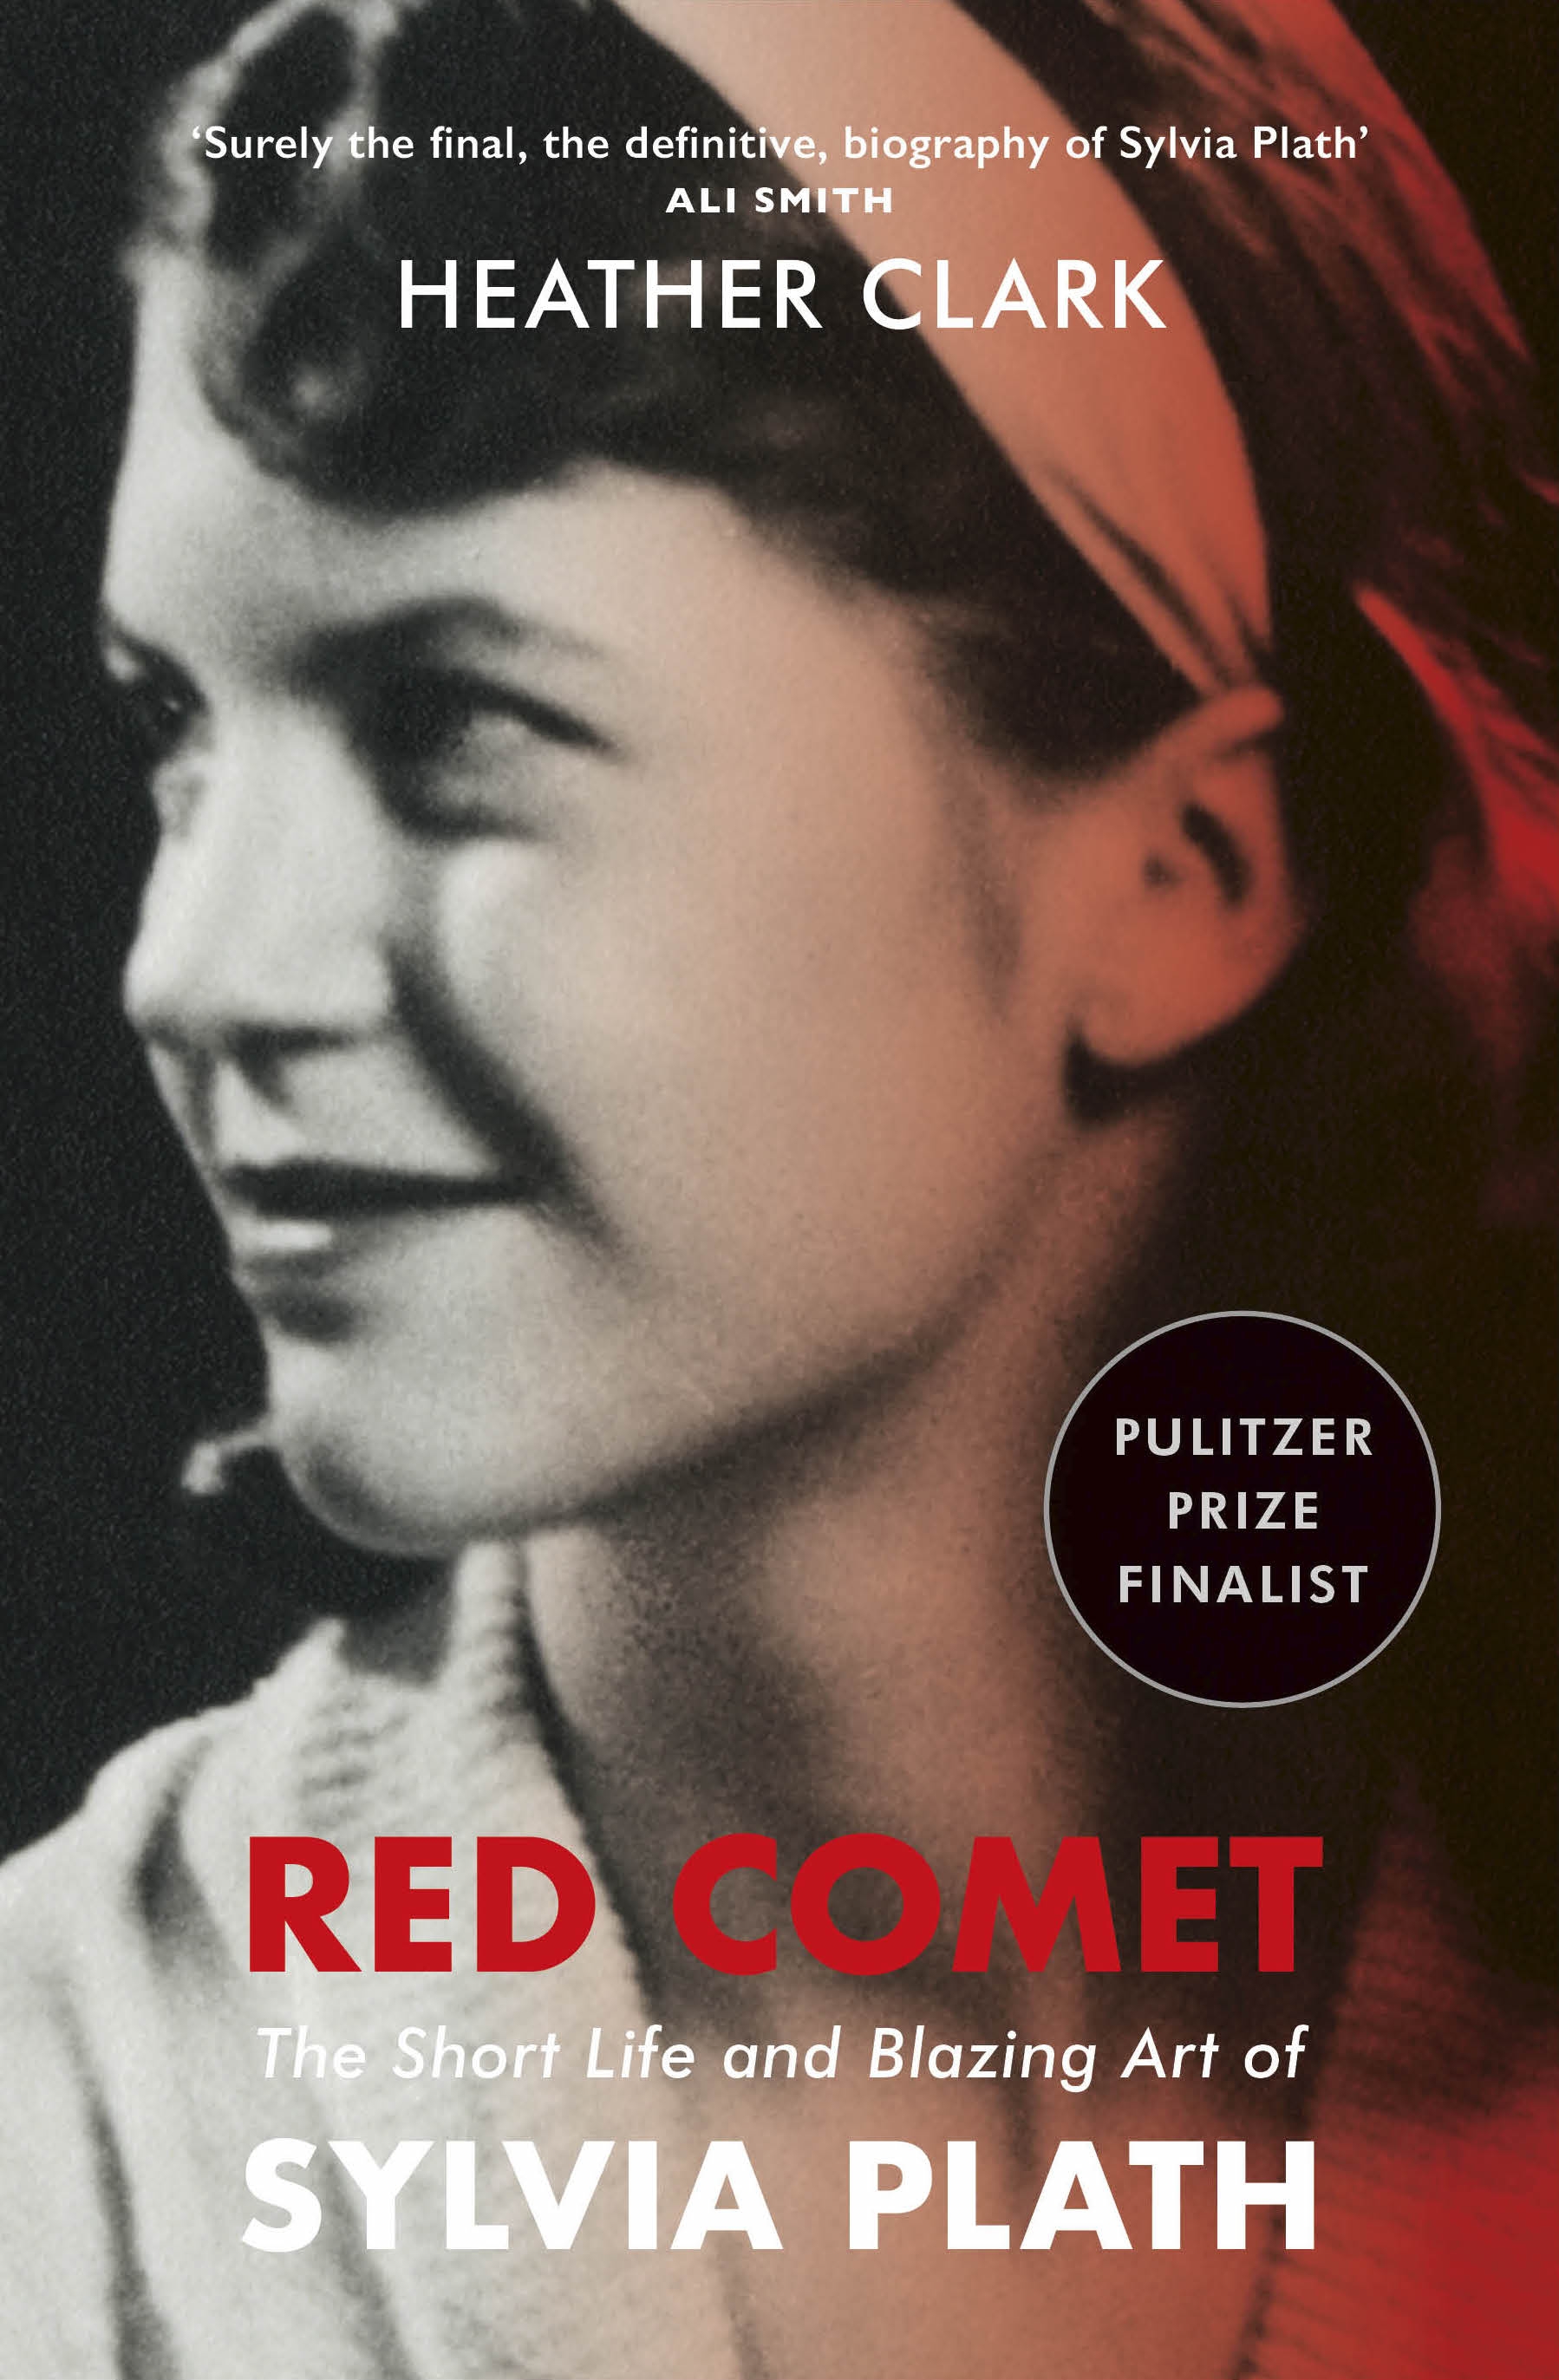 RED COMET : A NEW YORK TIMES TOP 10 BOOK OF 2021